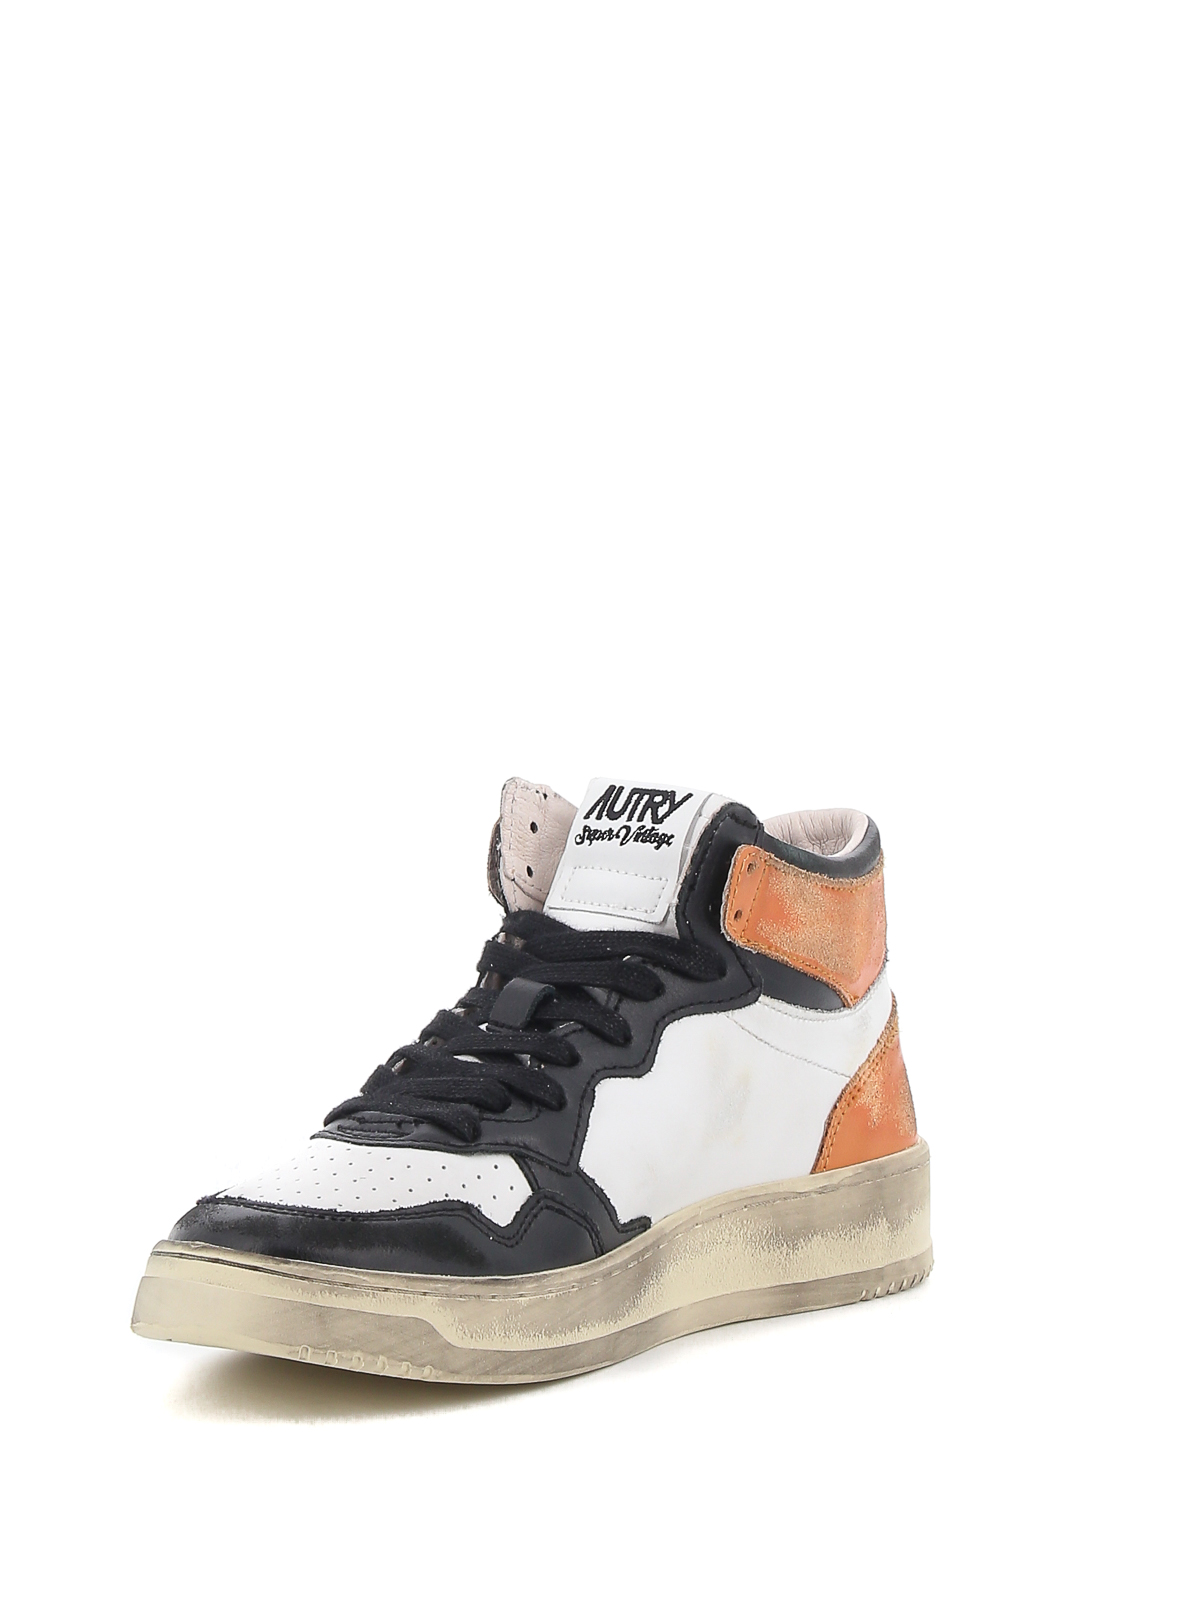 Trainers Autry - Super Vintage high top sneakers - AVMMSV04 | iKRIX.com